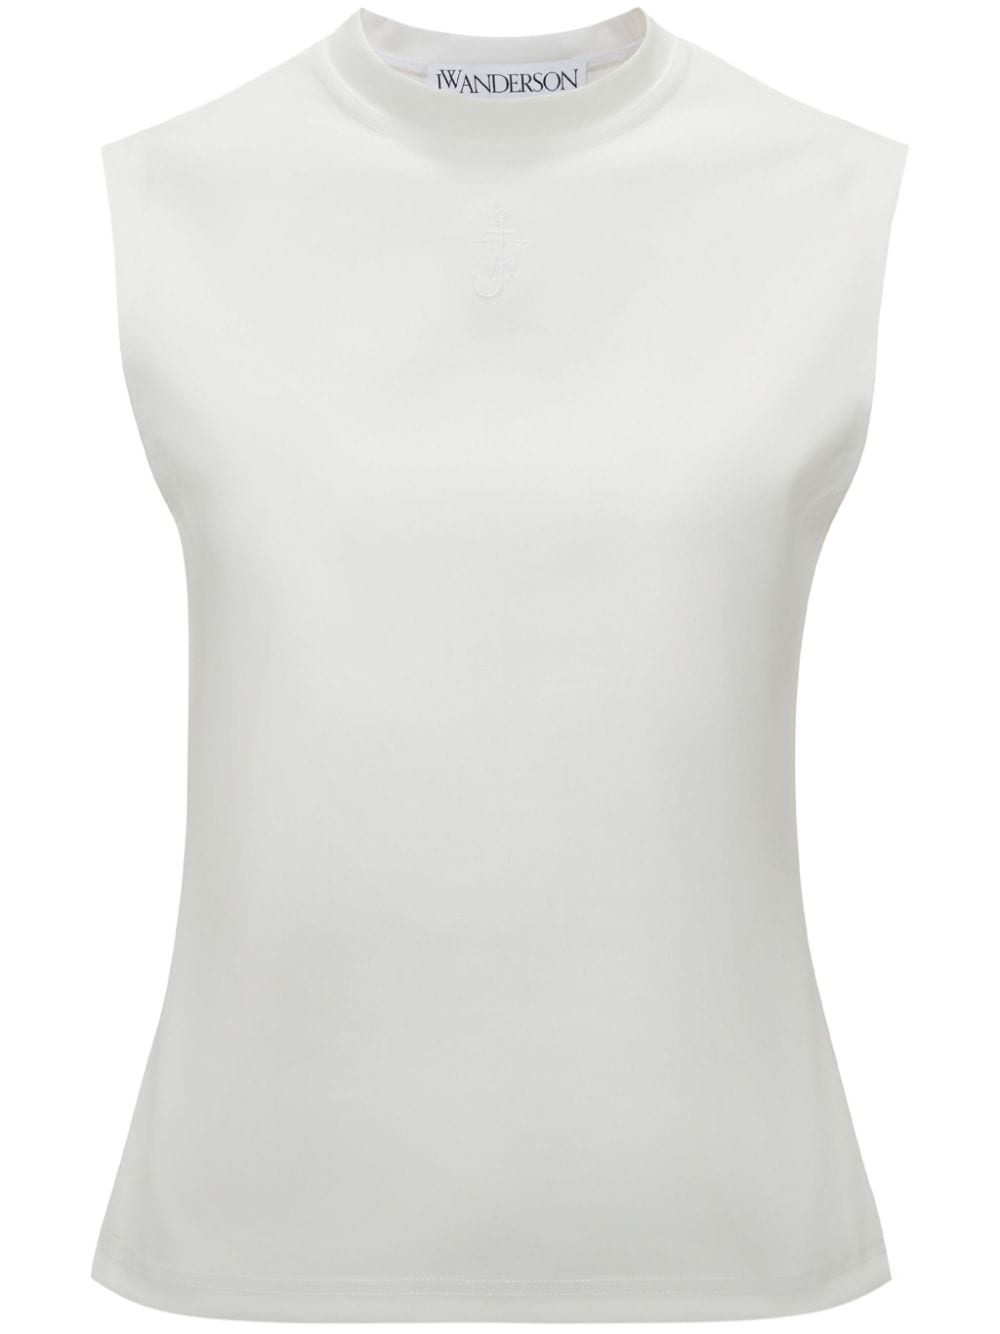 JW Anderson logo-embroidered tank top - White